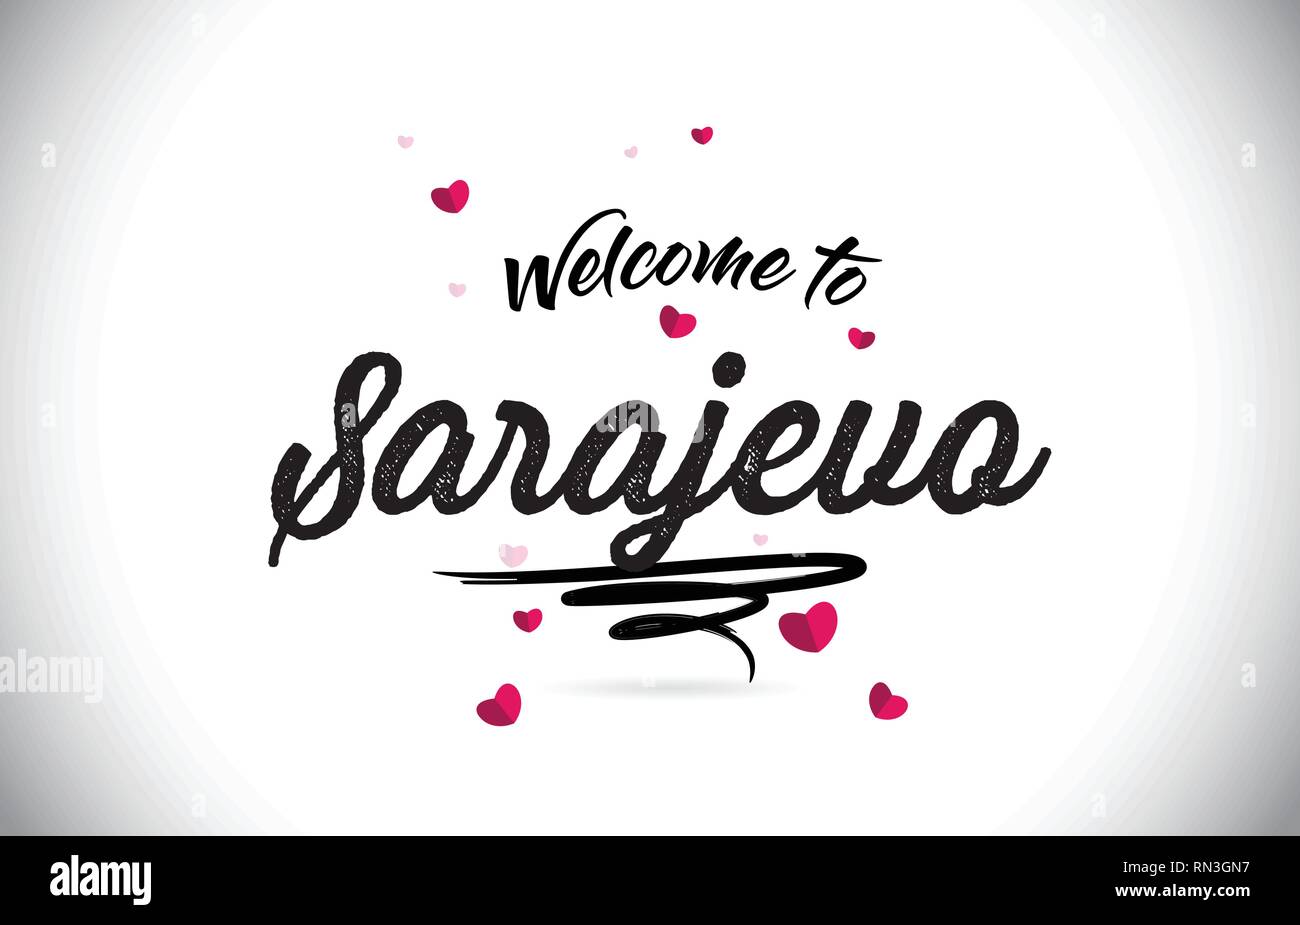 Sarajevo Welcome To Word Text with Handwritten Font and Pink Heart Shape Design Vector Illustration. Stock Vector